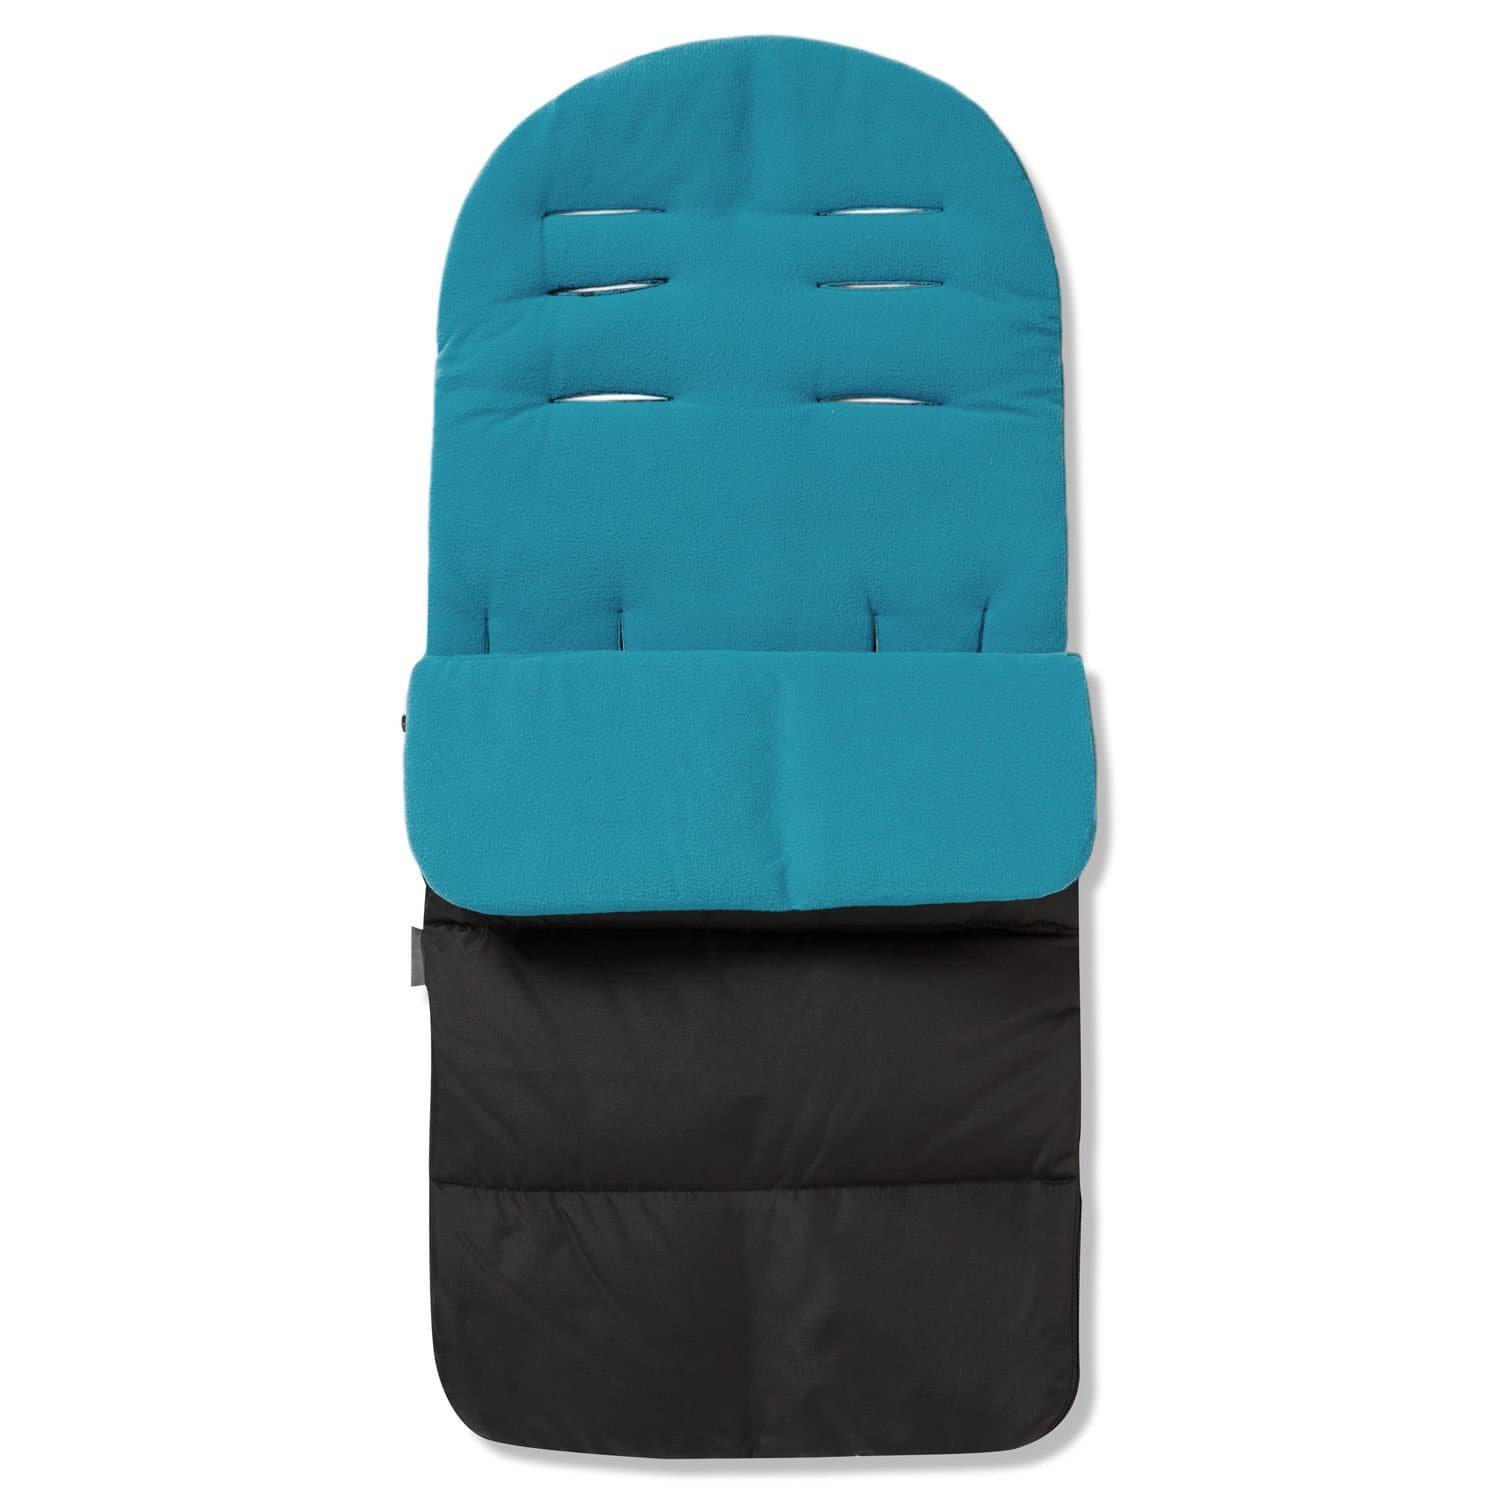 Premium Footmuff / Cosy Toes Compatible with Baby Elegance - Ocean Blue / Fits All Models | For Your Little One